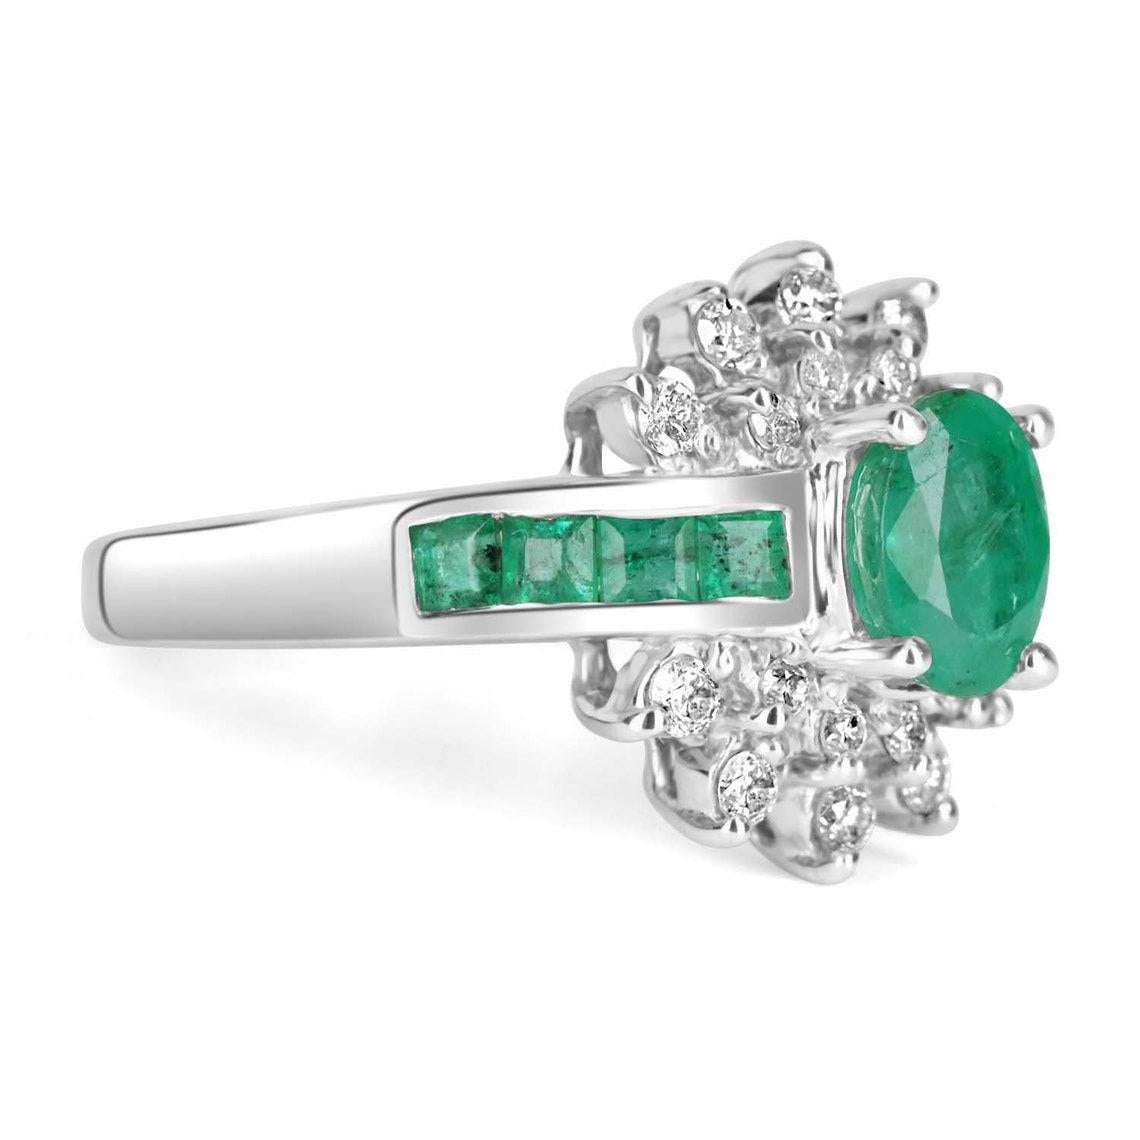 Displayed is a stunning, 1.98tcw Oval Colombian emerald and diamond ring solid 14K gold. This is a perfect emerald right-hand ring with a beautiful center stone. The center gem measures 7x5 and weighs an estimated 0.90+pts. Set in 14K white gold